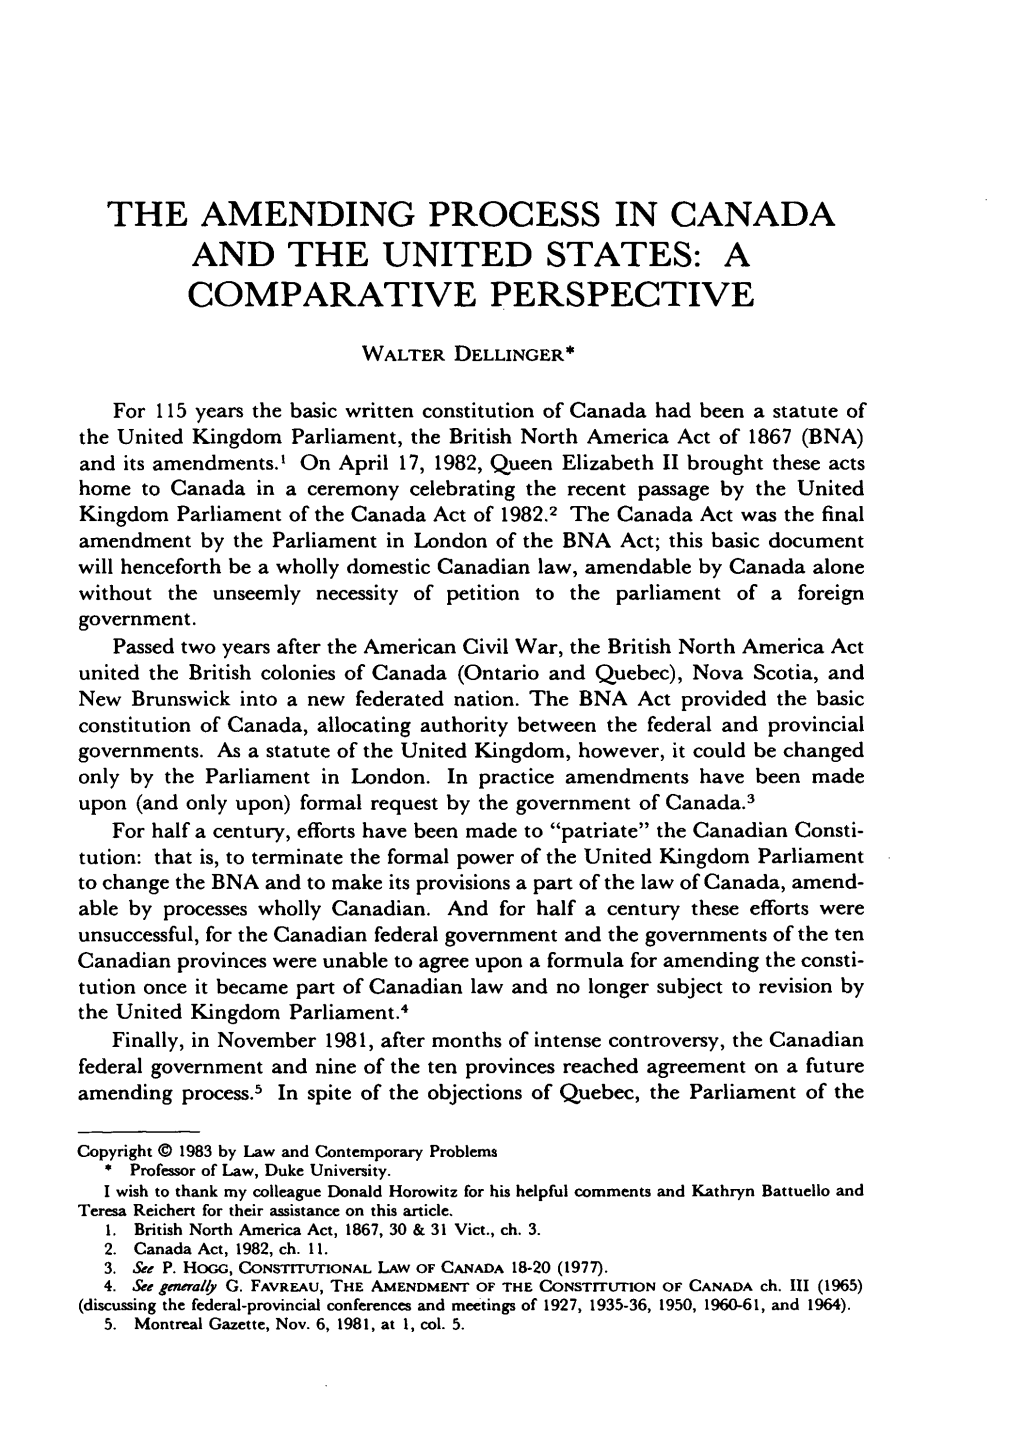 The Amending Process in Canada and the United States: a Comparative Perspective